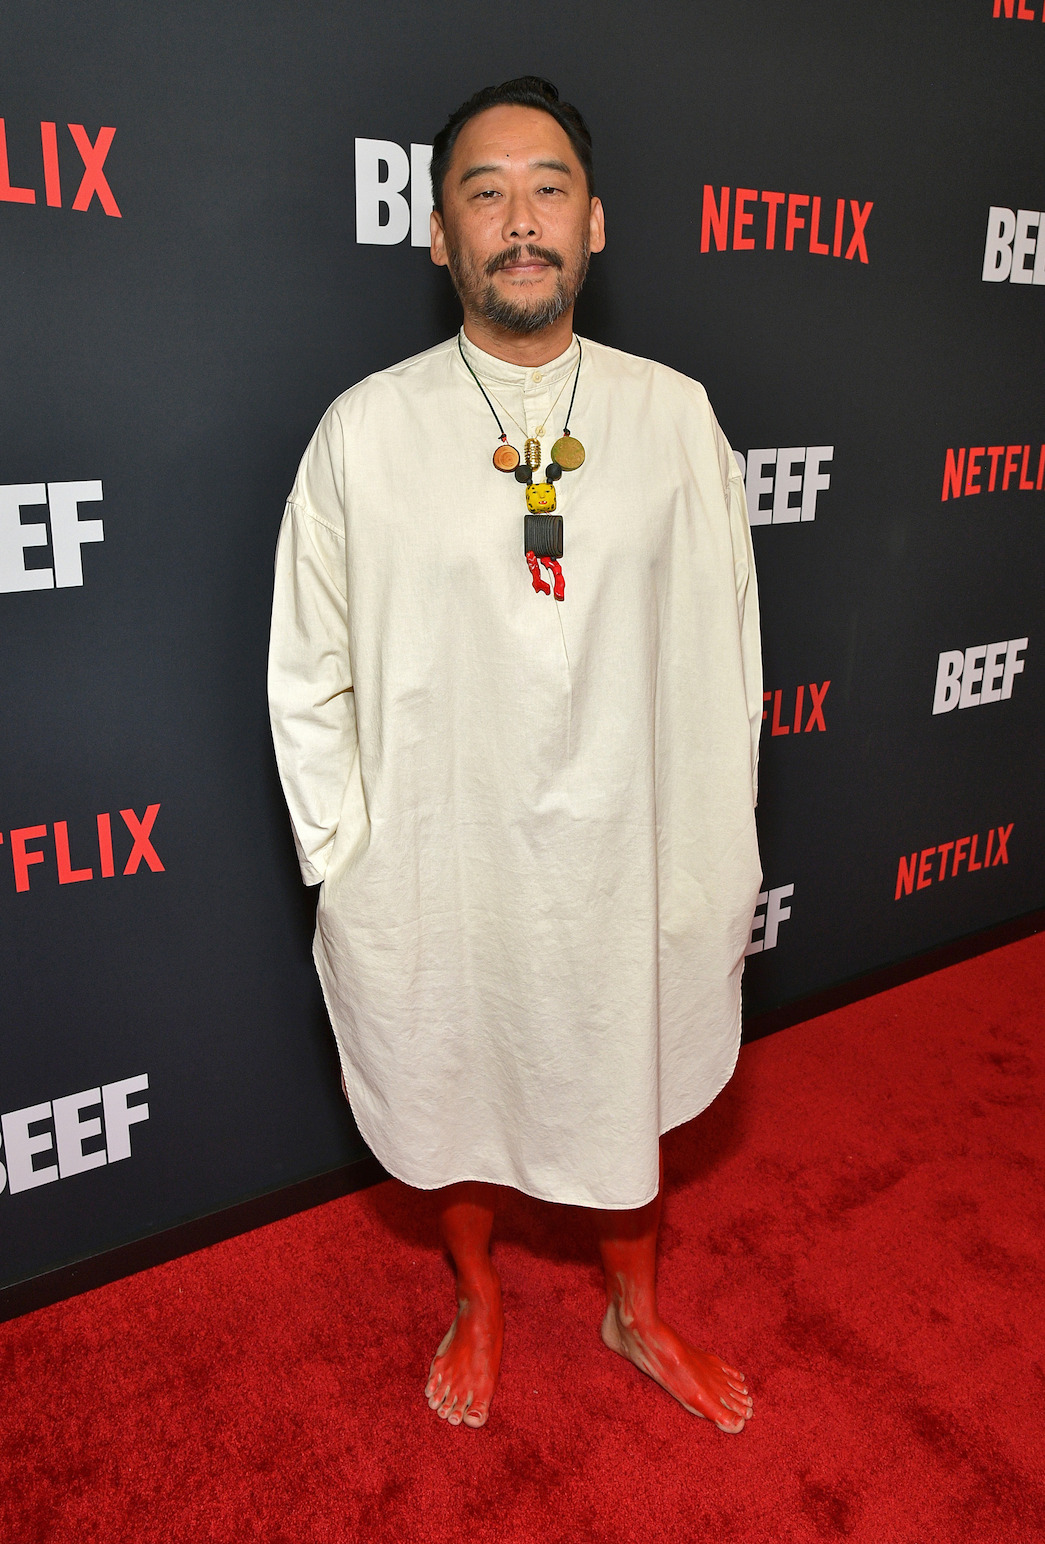 David Choe at the Los Angeles Premiere of Netflix's "BEEF" on March 30, 2023 in Hollywood, California.